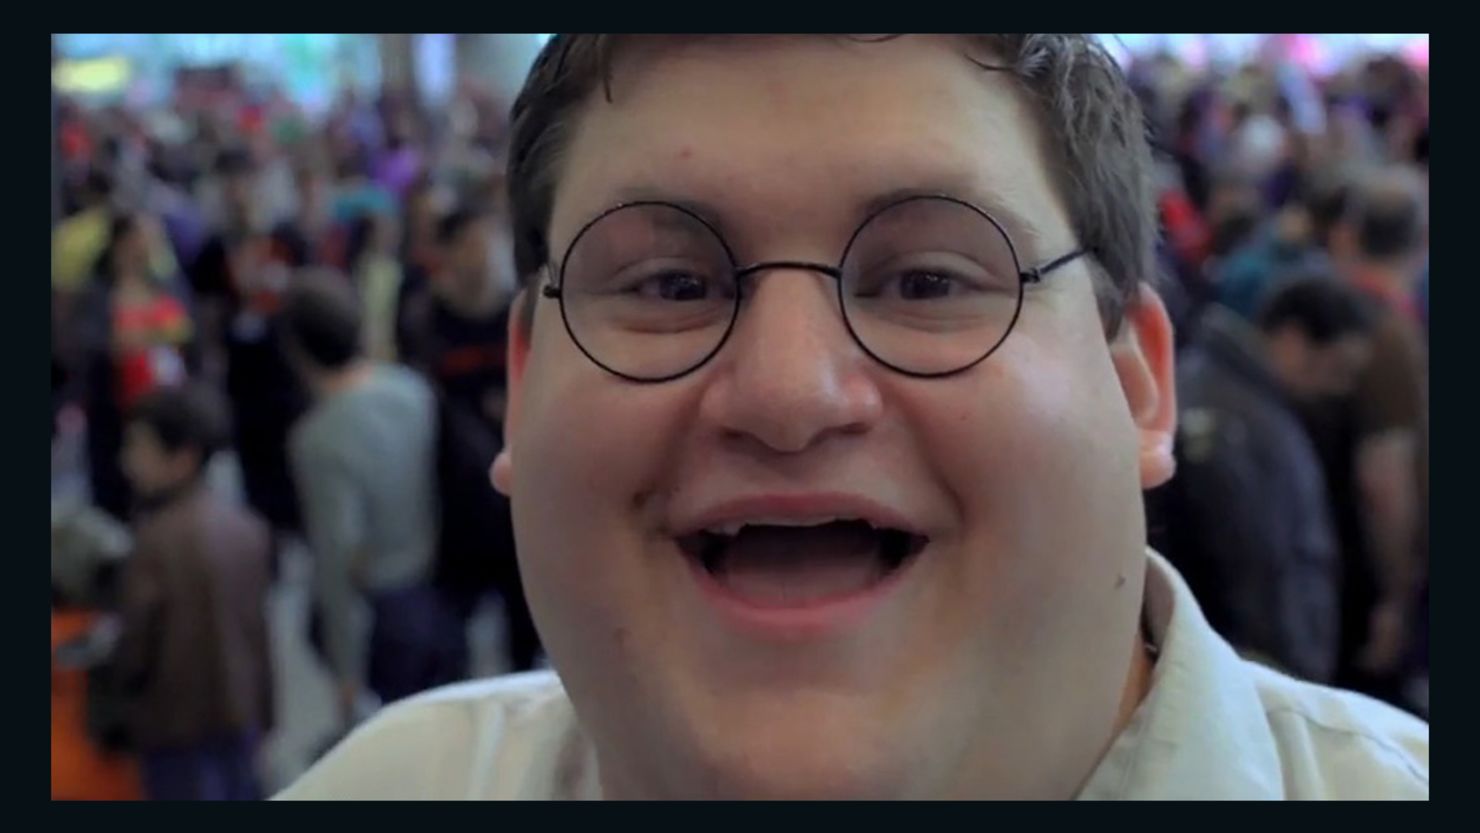 Robert Franzese has become a cosplay celebrity for his impression of Peter Griffin from "Family Guy."